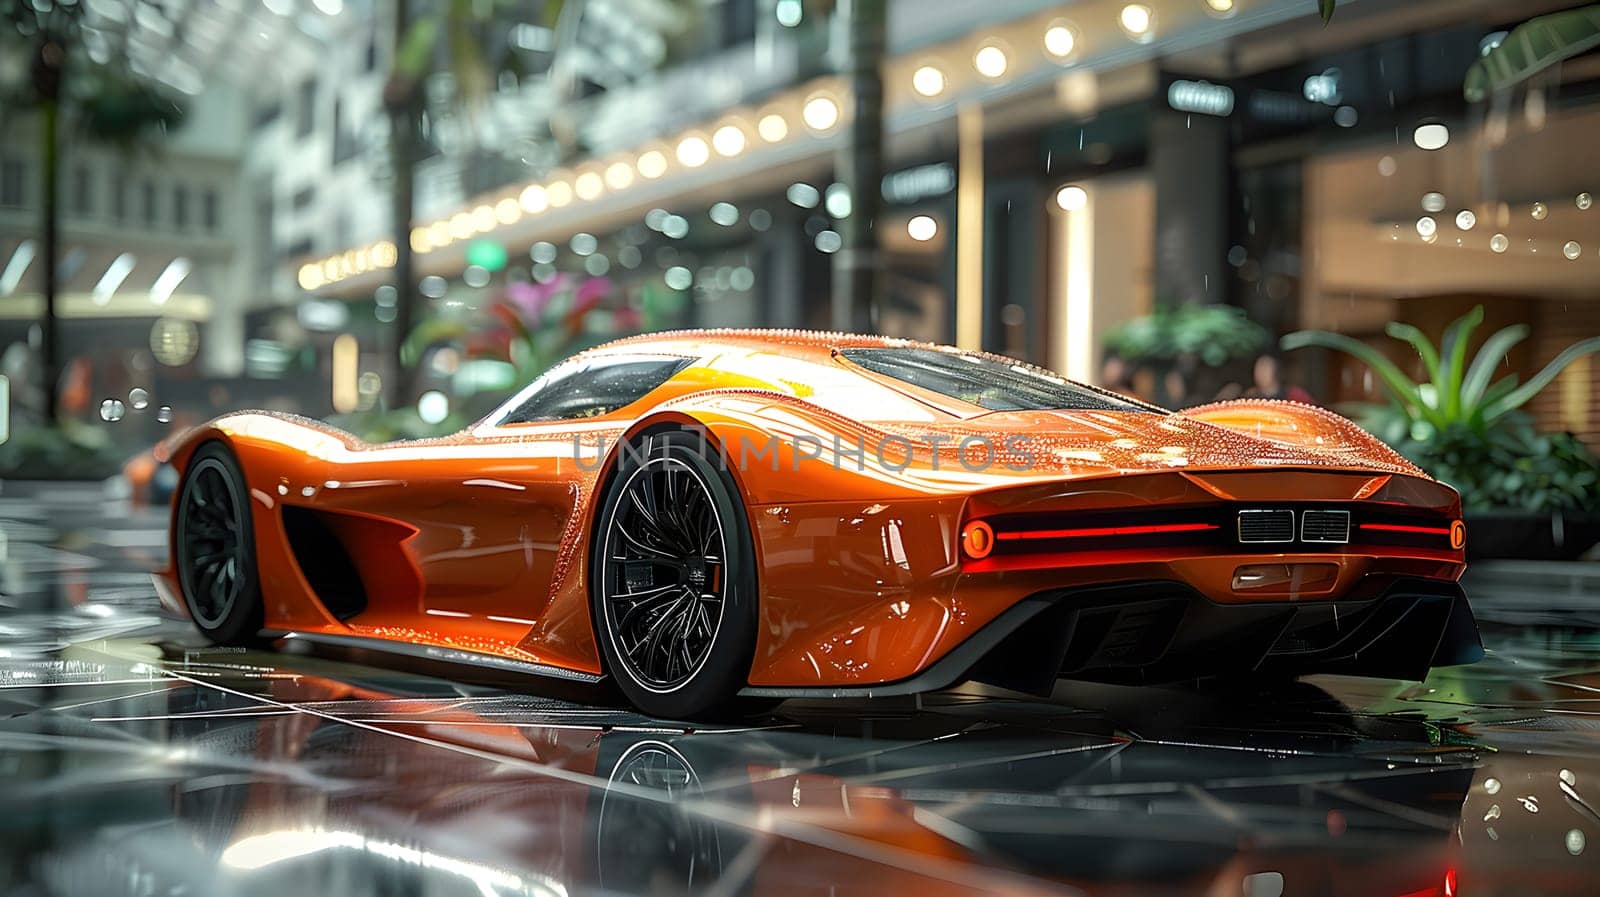 A sleek orange sports car is parked in the rain, illuminated by the automotive parking lights in front of a building, showcasing its stylish design and shiny wheels